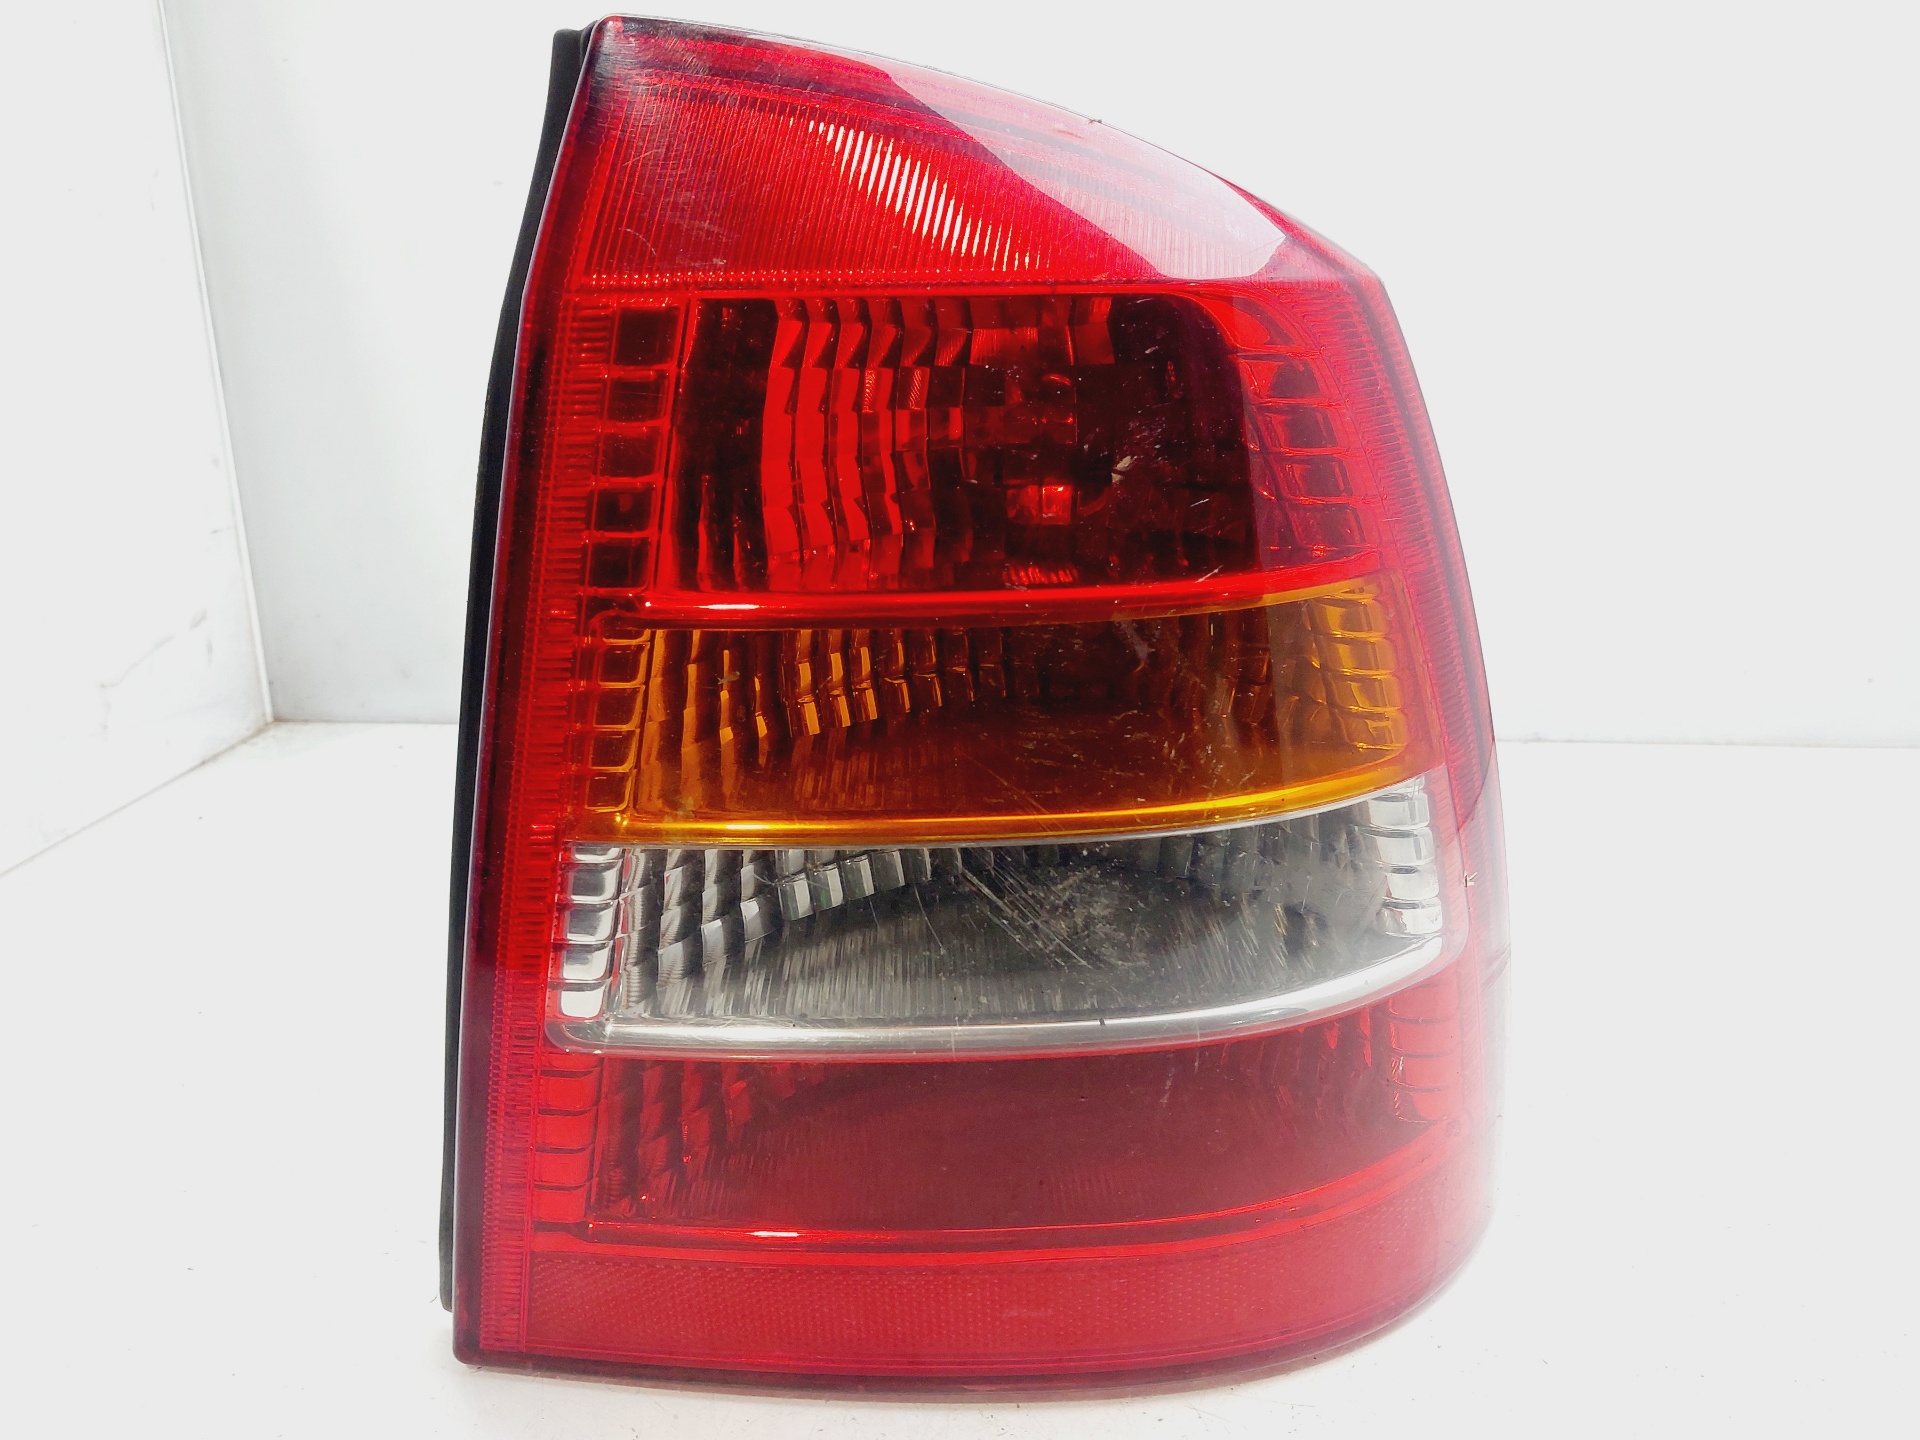 OPEL Astra H (2004-2014) Rear Right Taillight Lamp 13110934 25281624